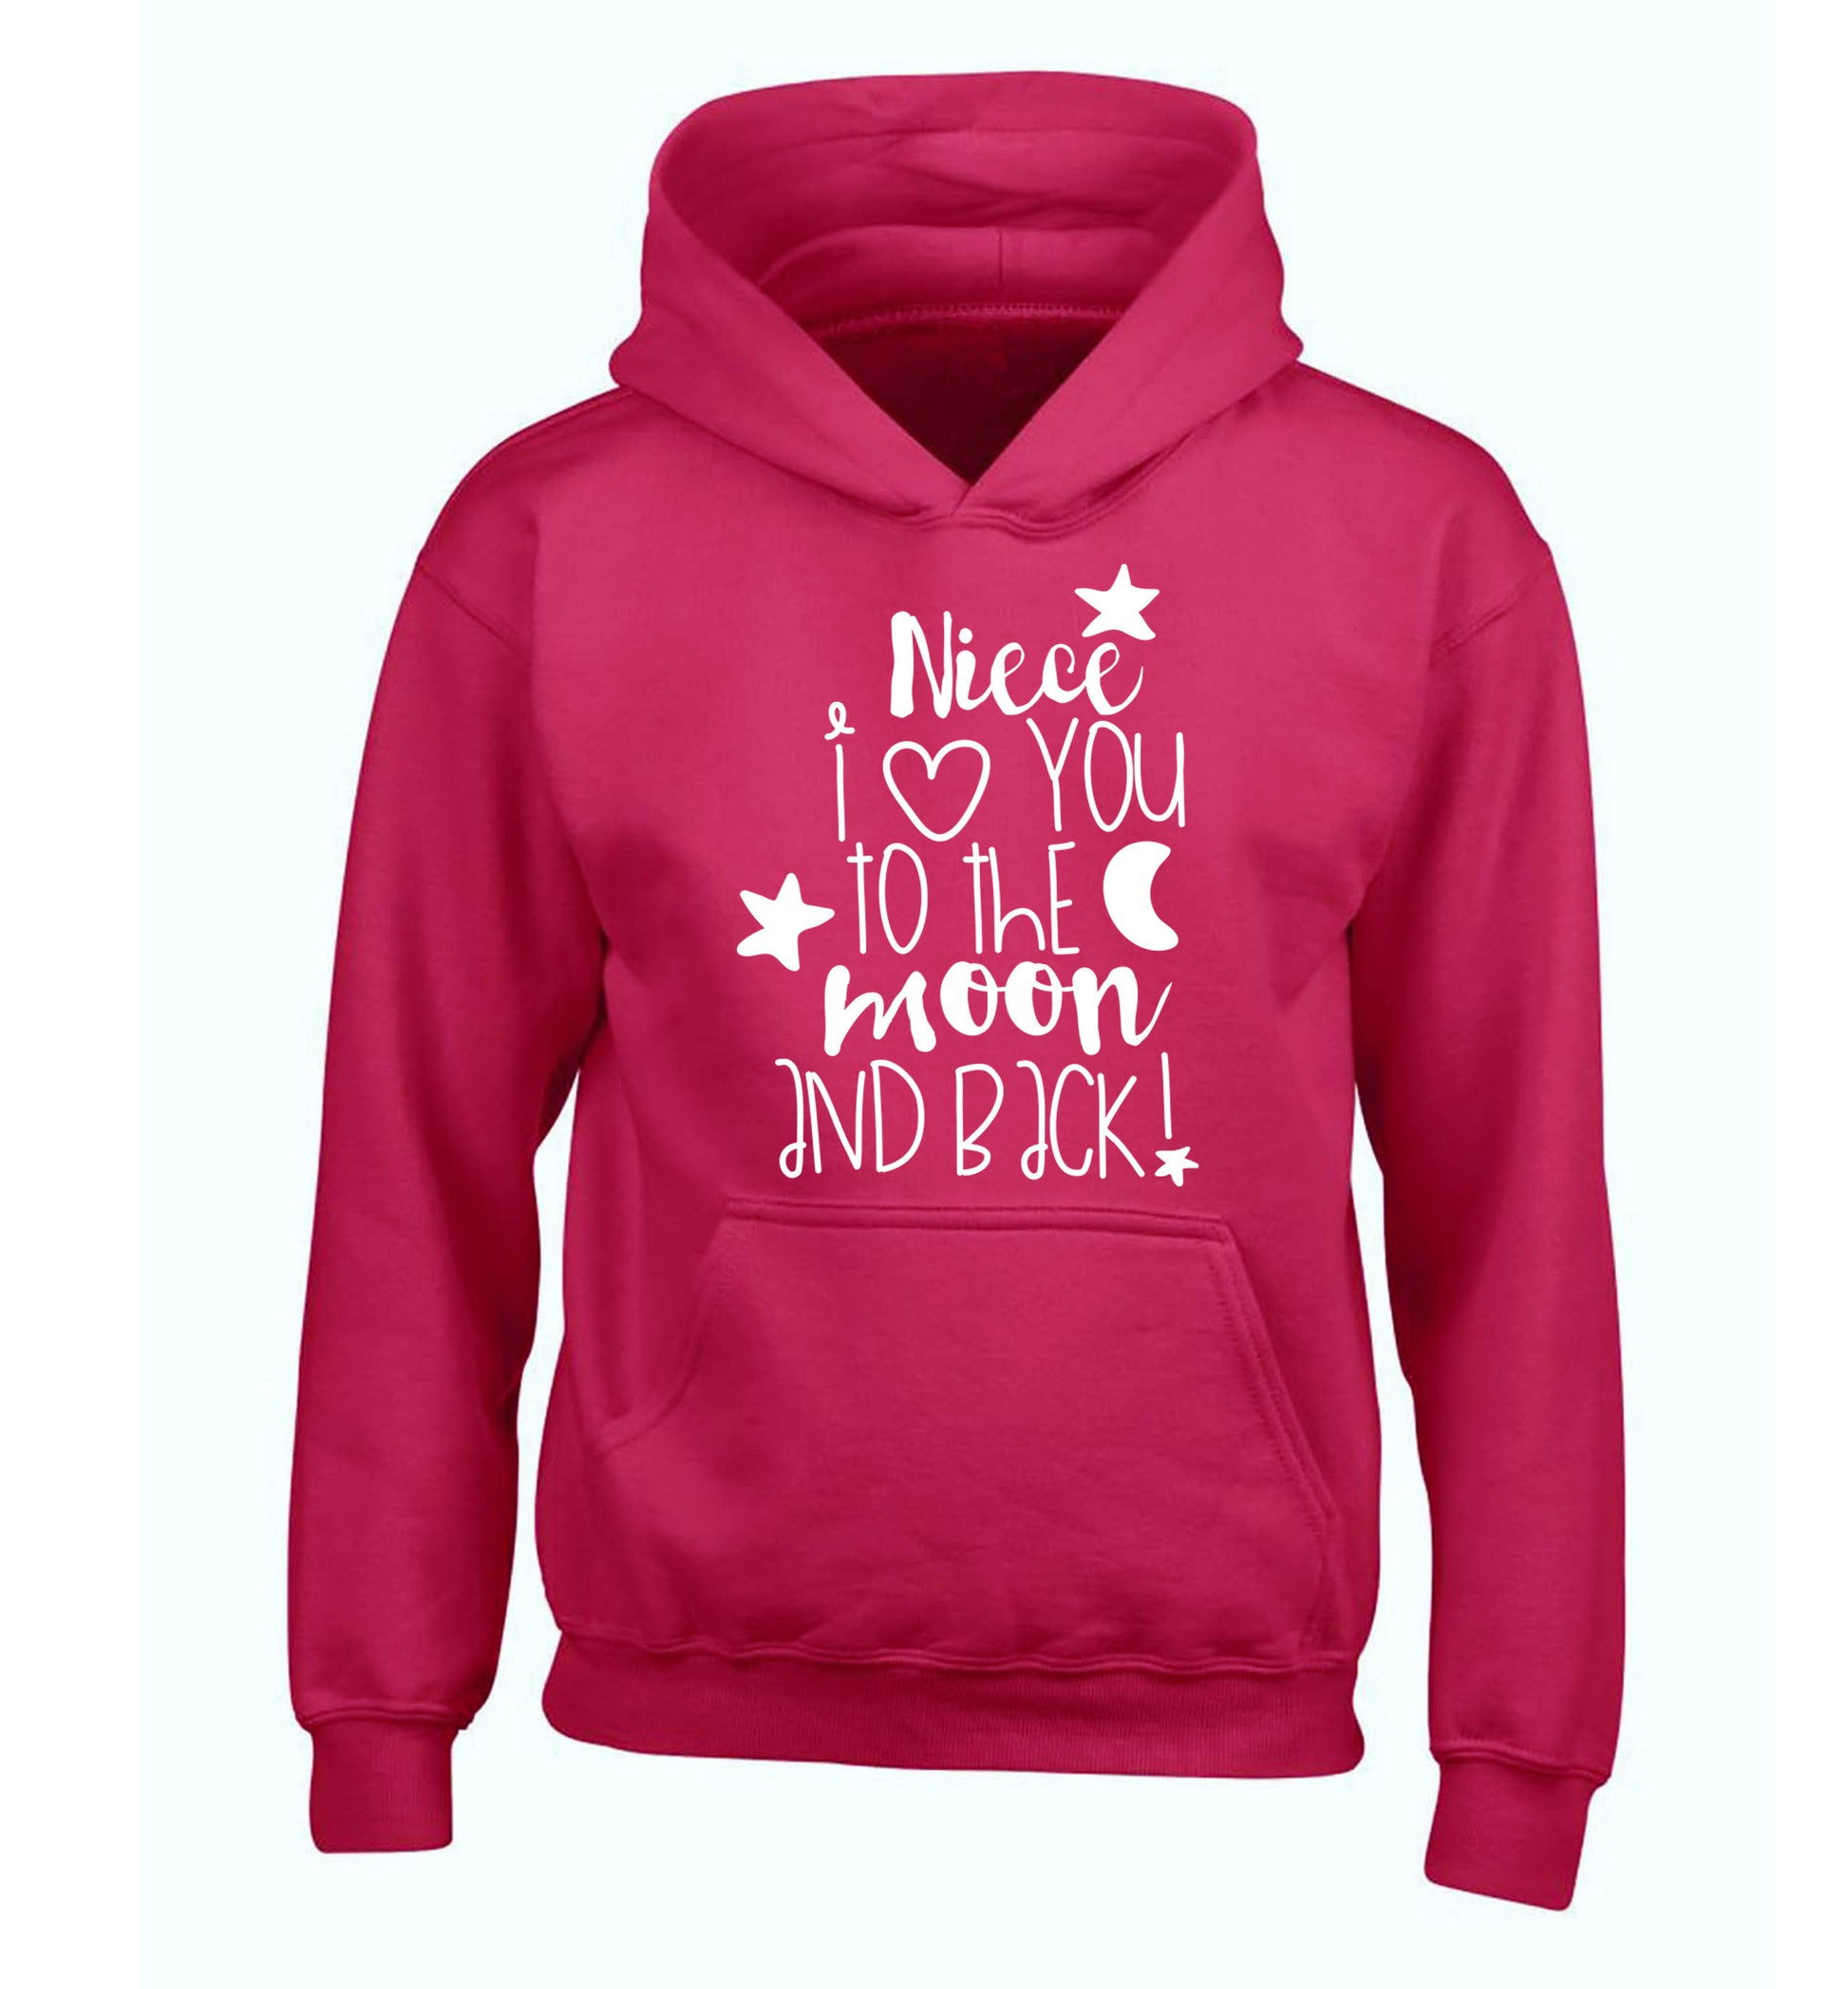 Niece I love you to the moon and back children's pink hoodie 12-14 Years